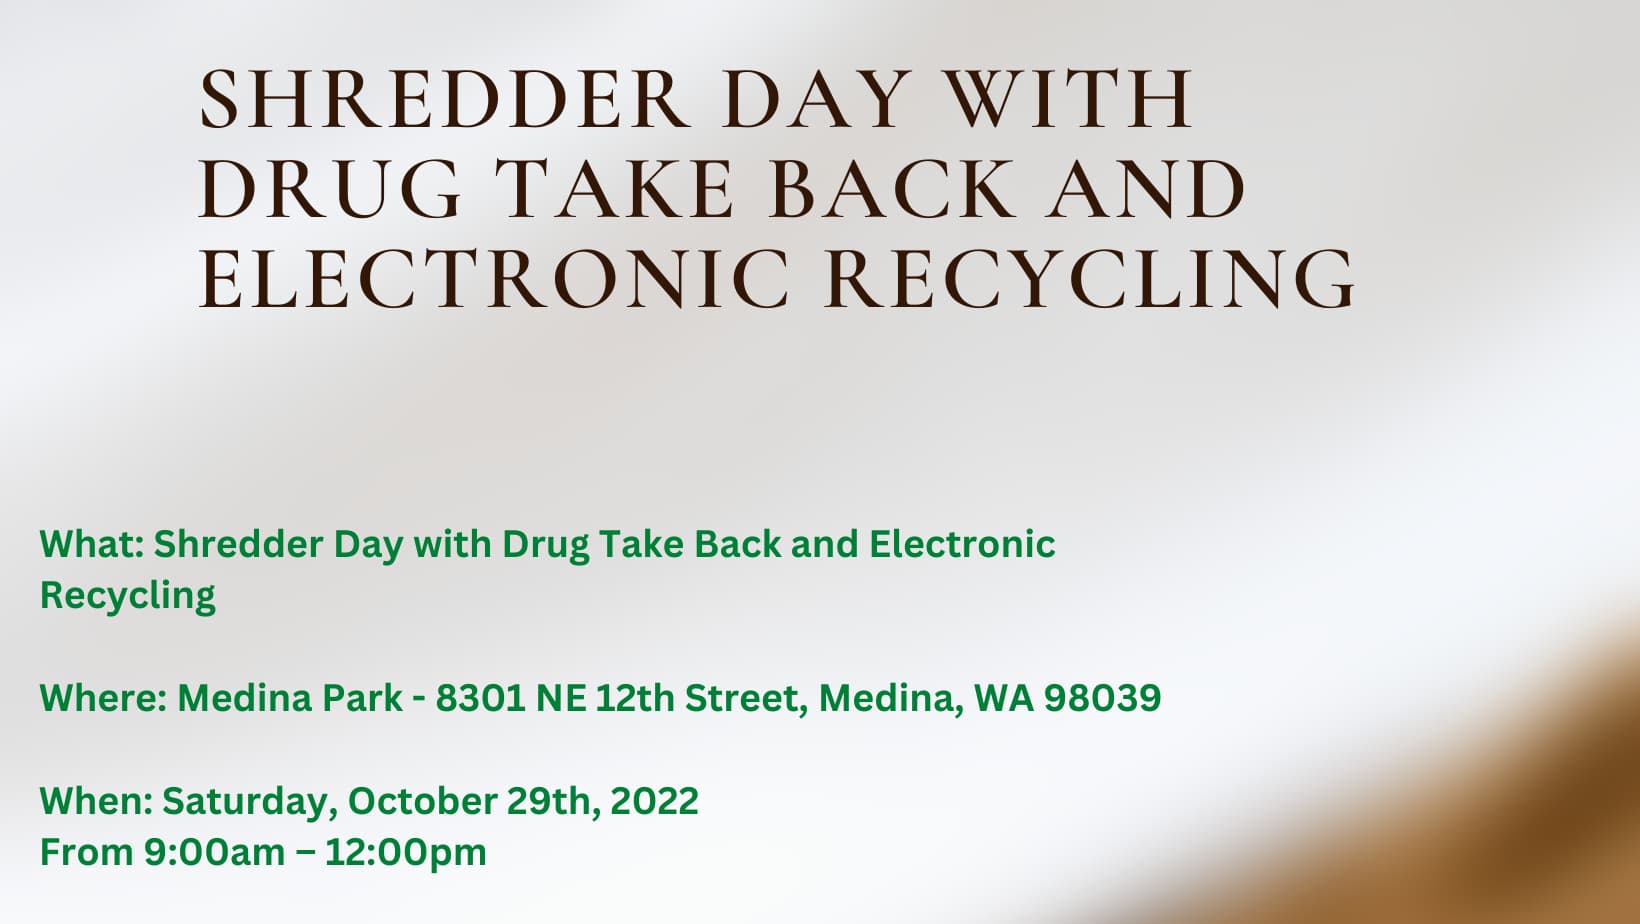 Shredder Day with Drug Take Back and Electronic Recycling